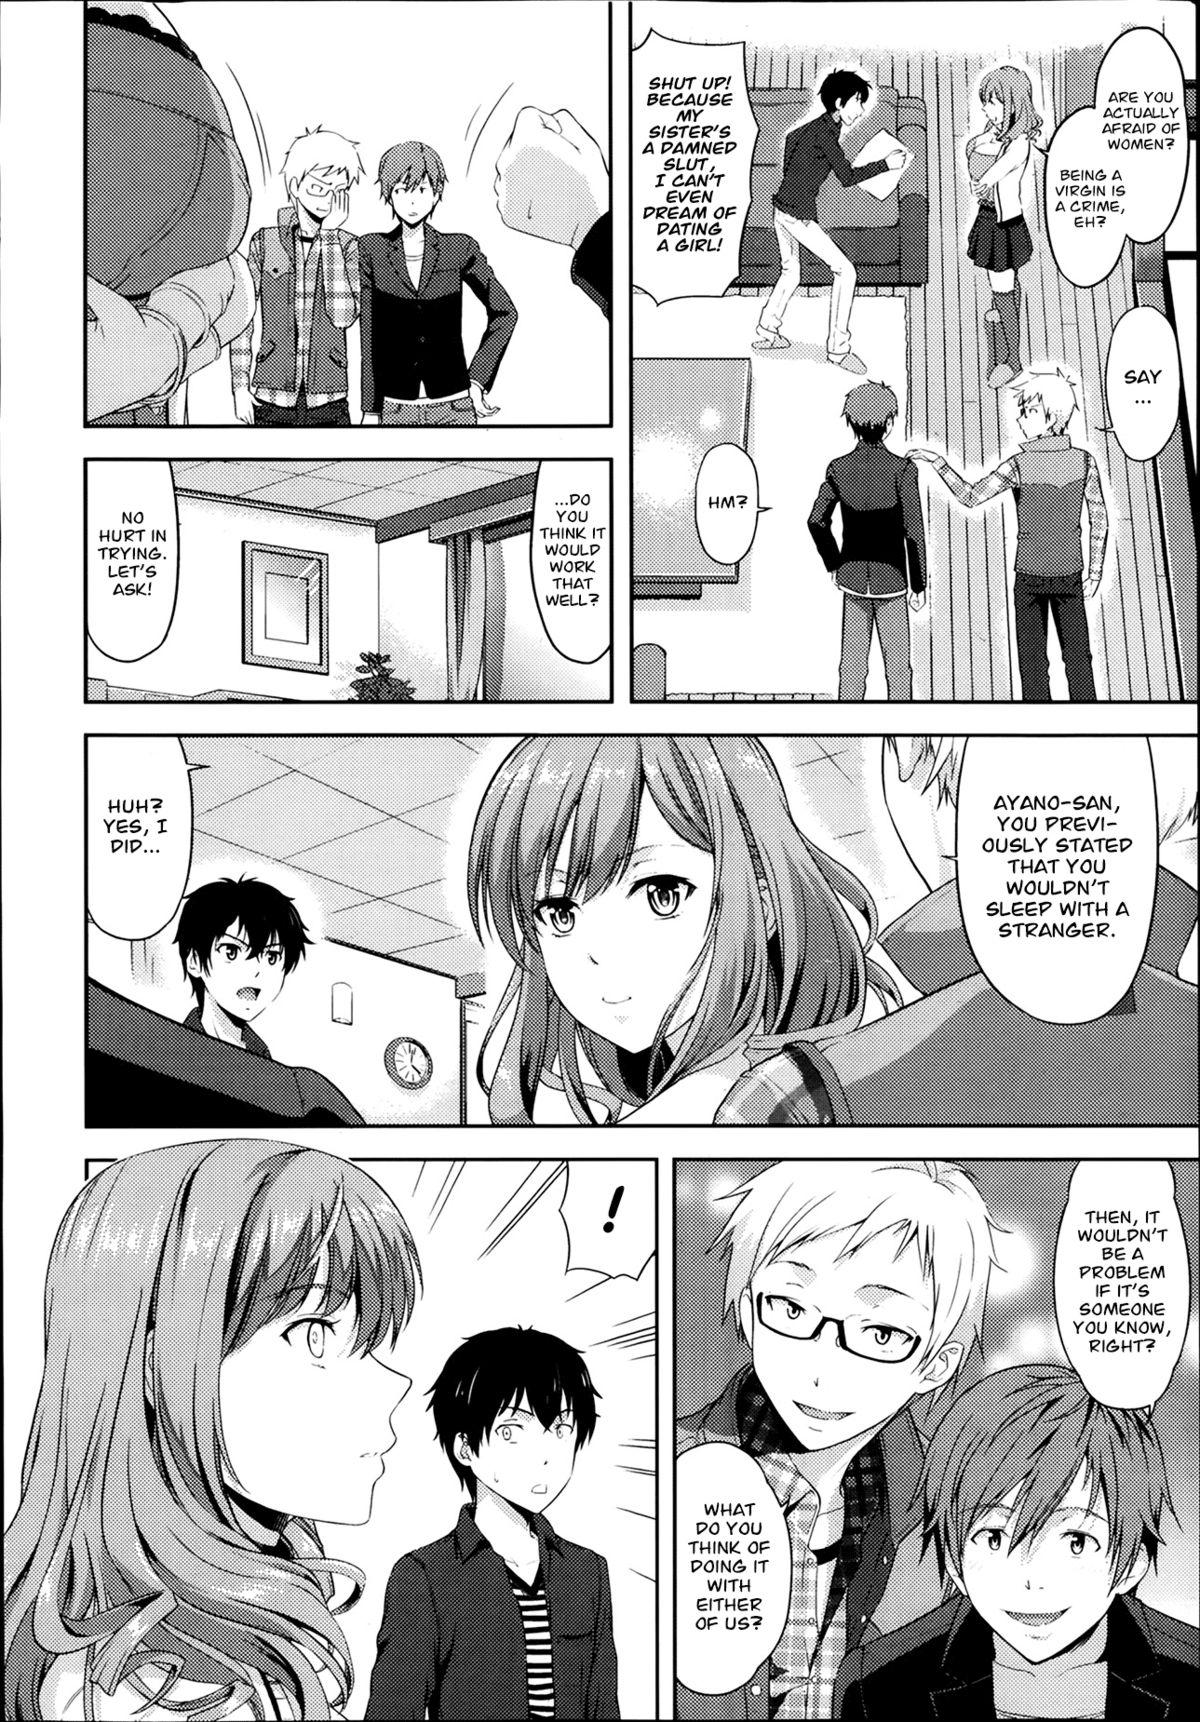 Riding Transit + Otometic Overdrive Office Fuck - Page 8